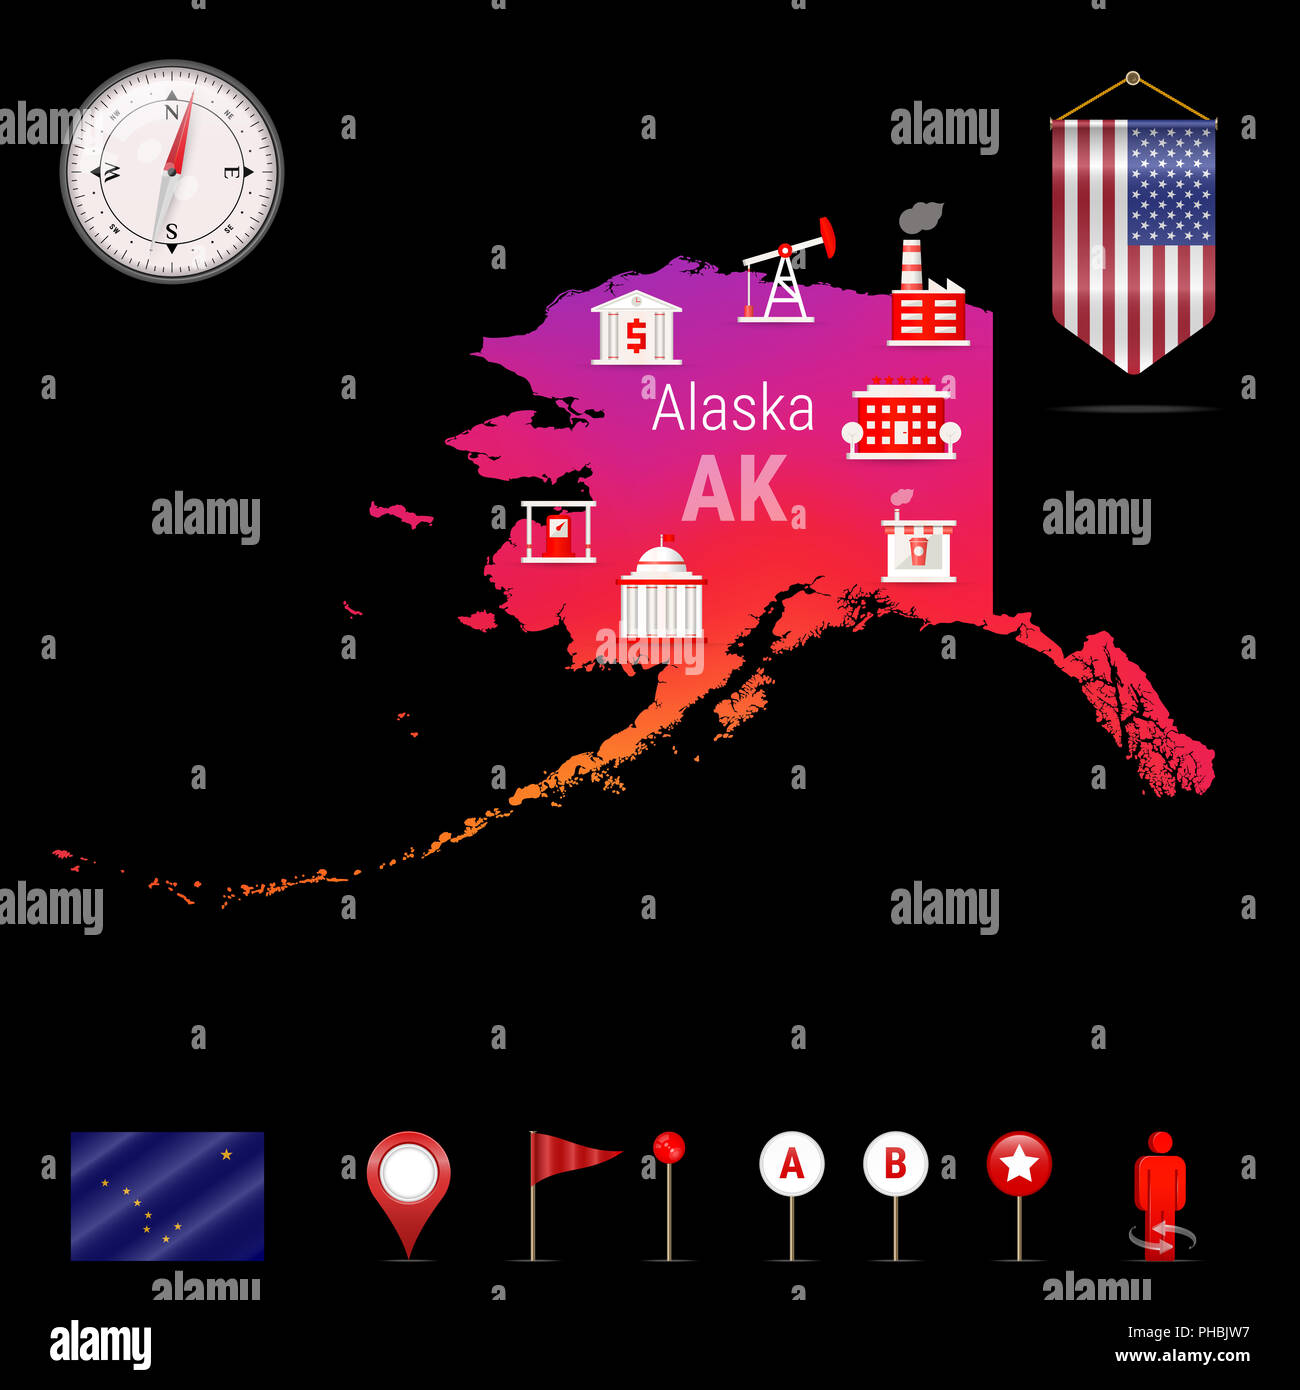 Alaska Map, Night View. Compass Icon, Map Navigation Elements. Pennant Flag of the United States. Flag of Alaska. Various Industries, Economic Geograp Stock Photo